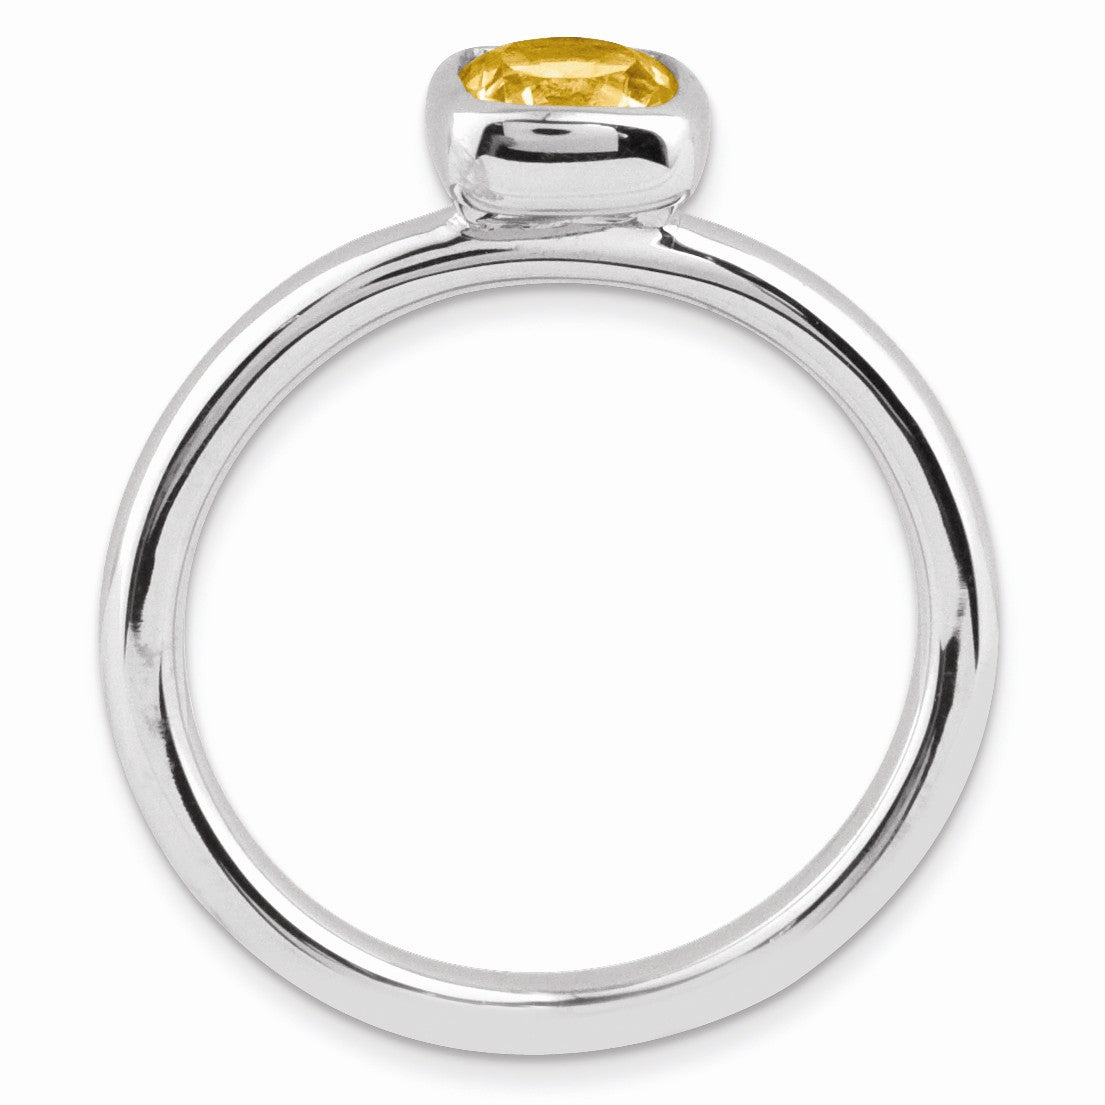 Alternate view of the Silver Stackable Cushion Cut Citrine Solitaire Ring by The Black Bow Jewelry Co.